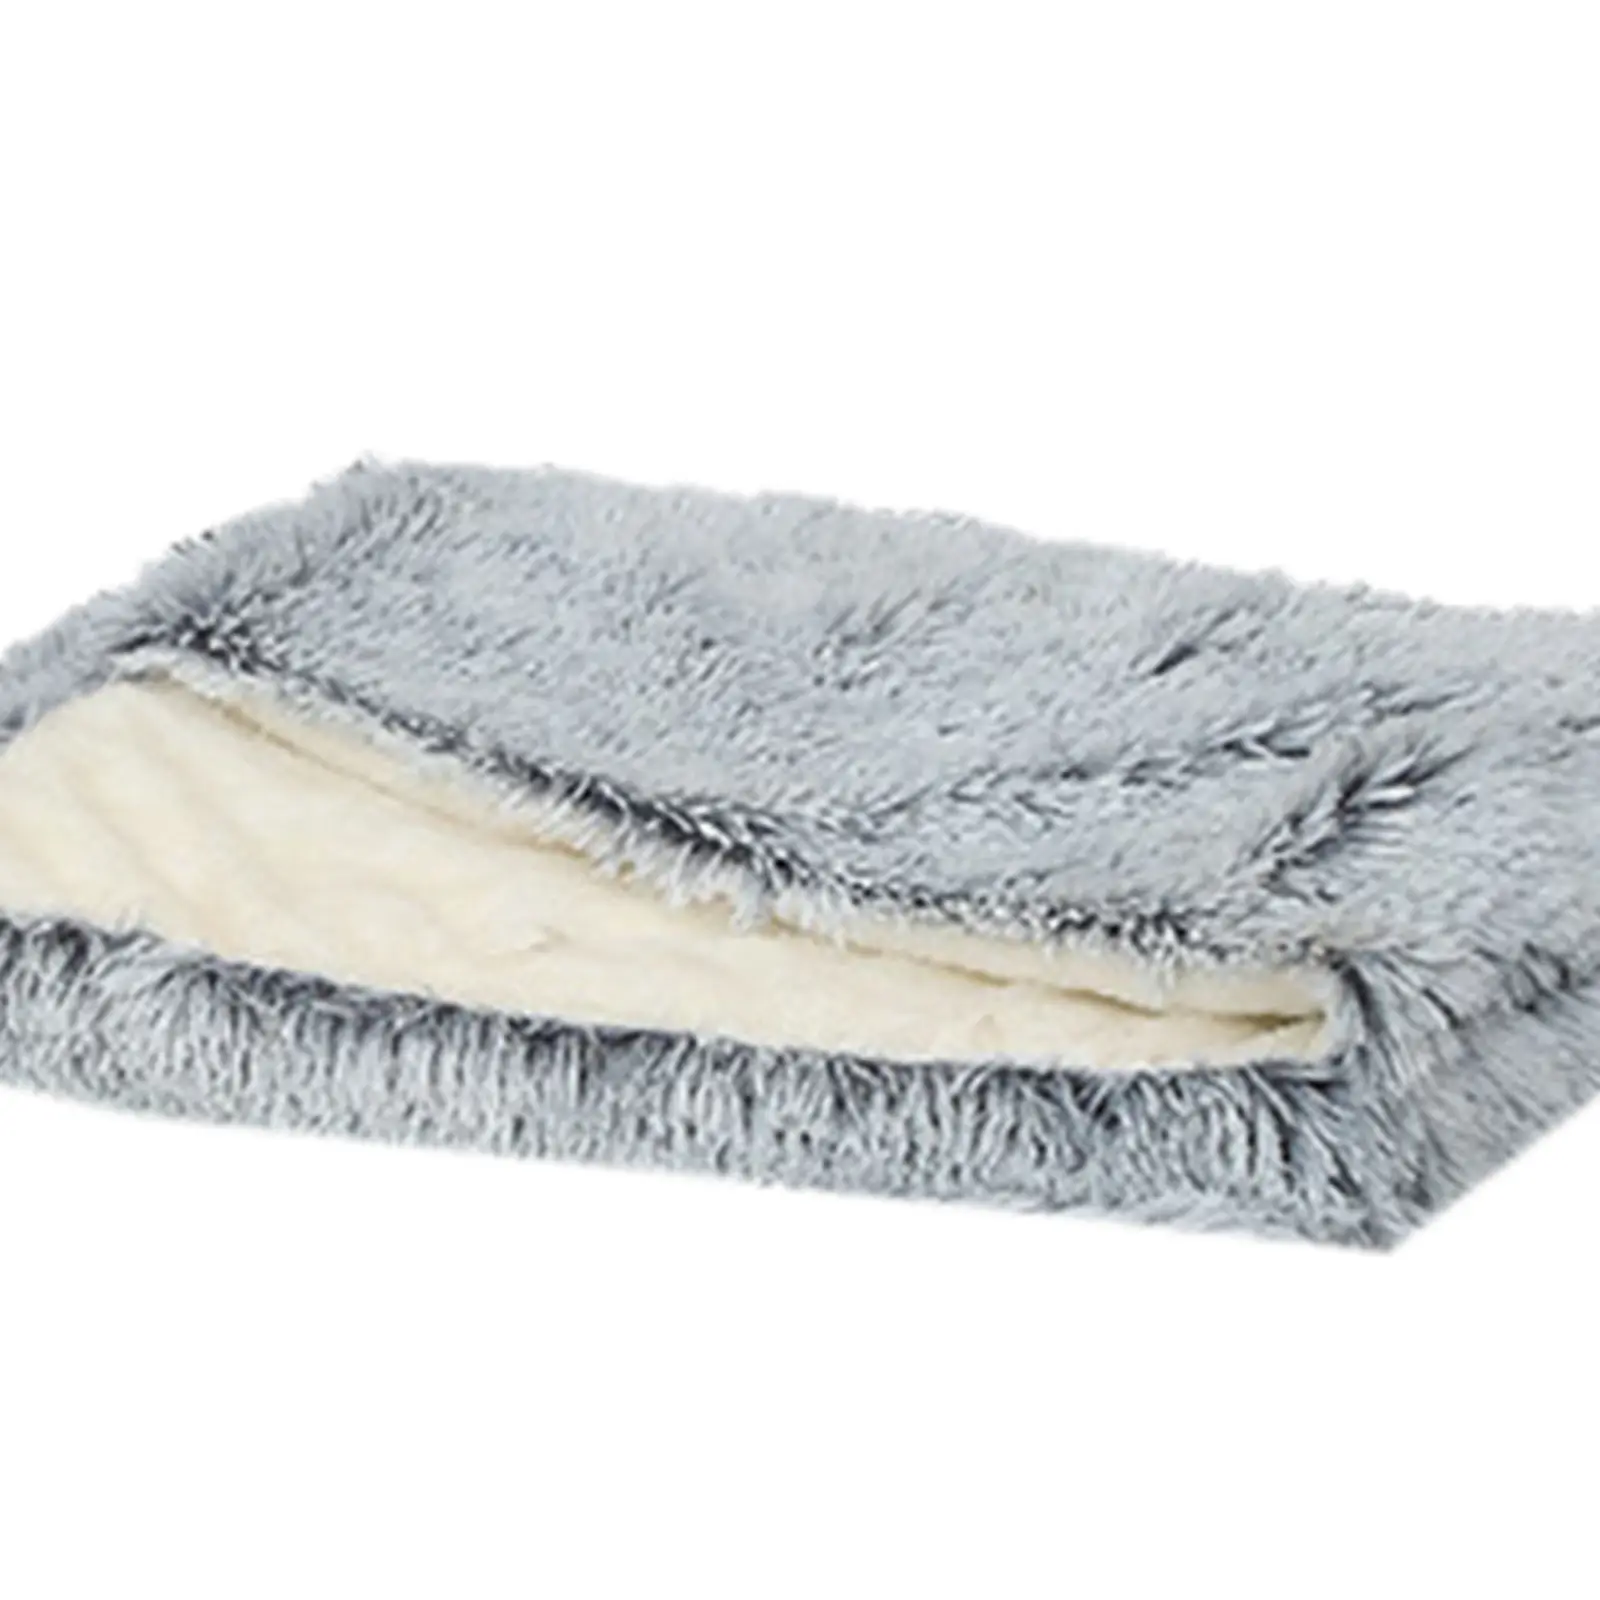 Arctic Velvet Cats Dogs Bed Soft Warm Cushion Anti-Slip Hooded 2 in 1 Puppy Calming Pet Bed Super Soft